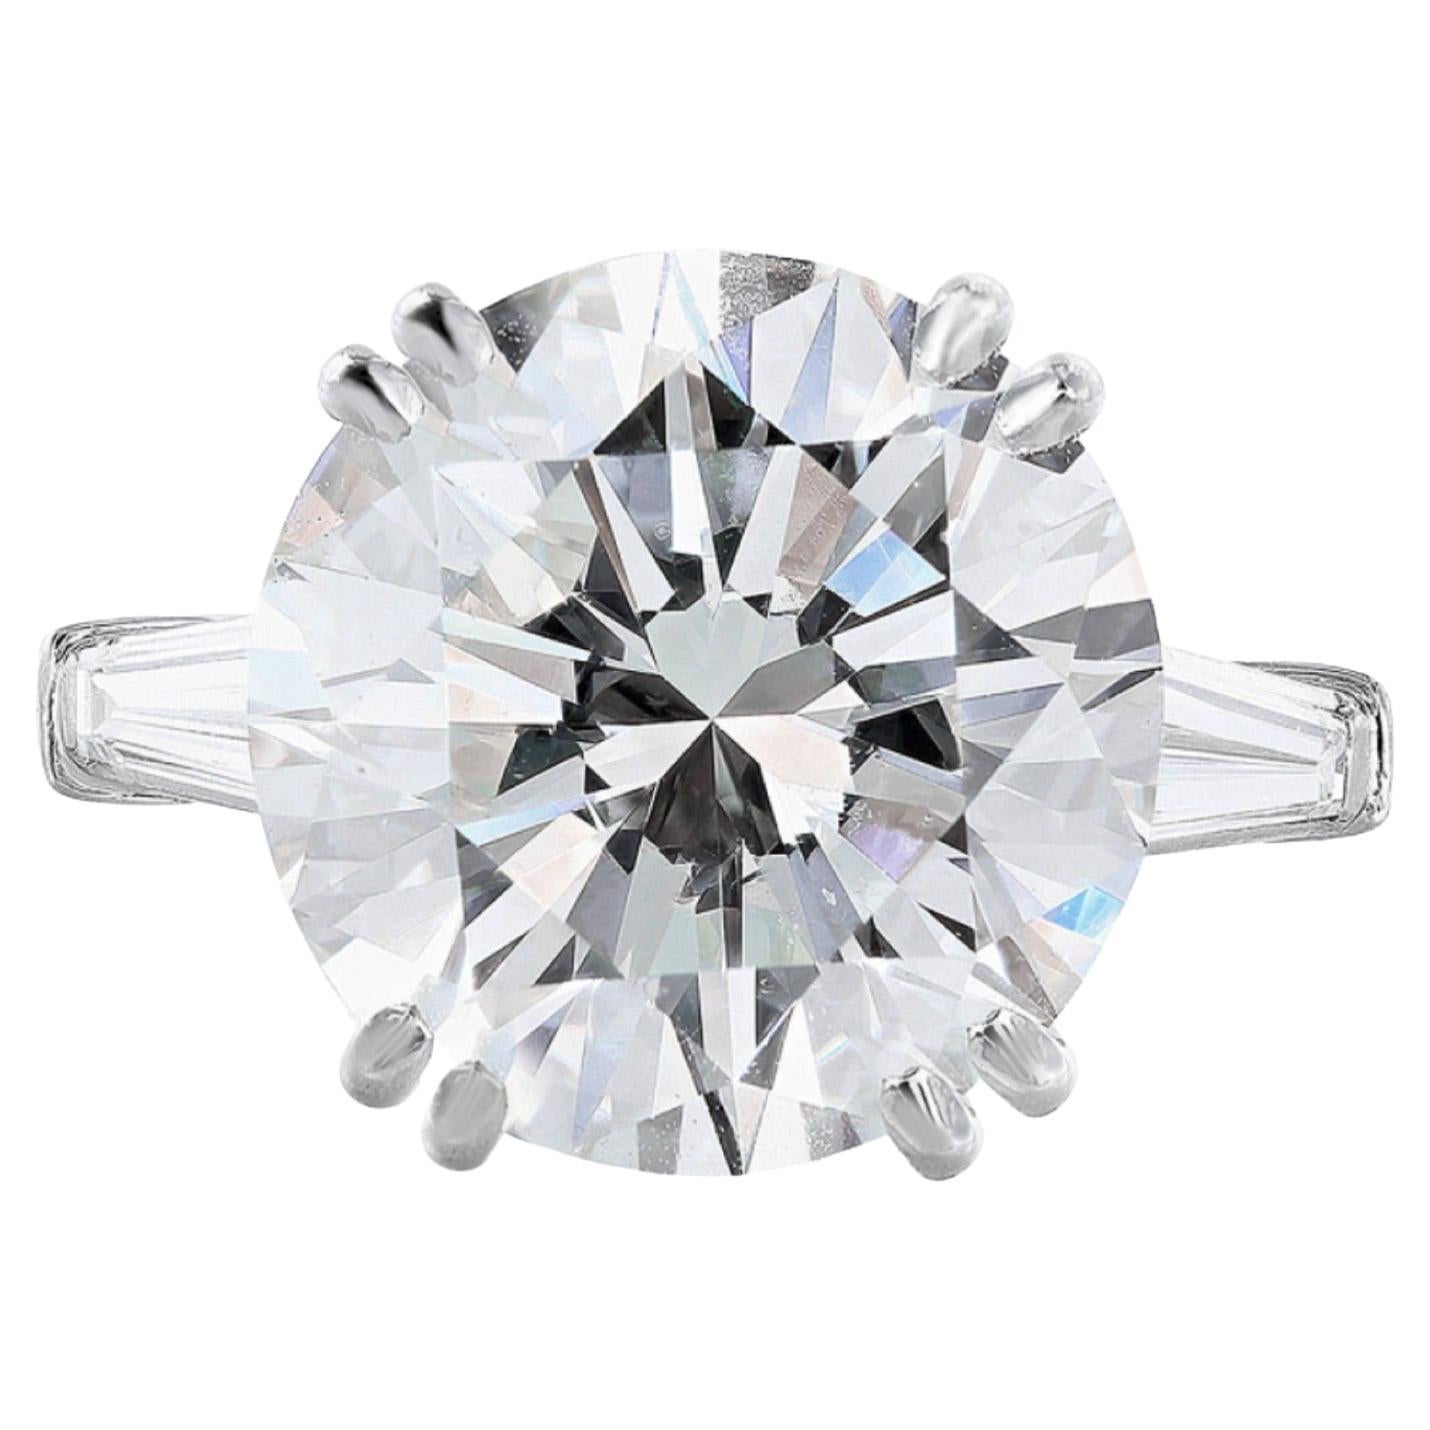 Exceptional Flawless GIA Certified 6 Carat Round Brilliant Cut Diamond Ring